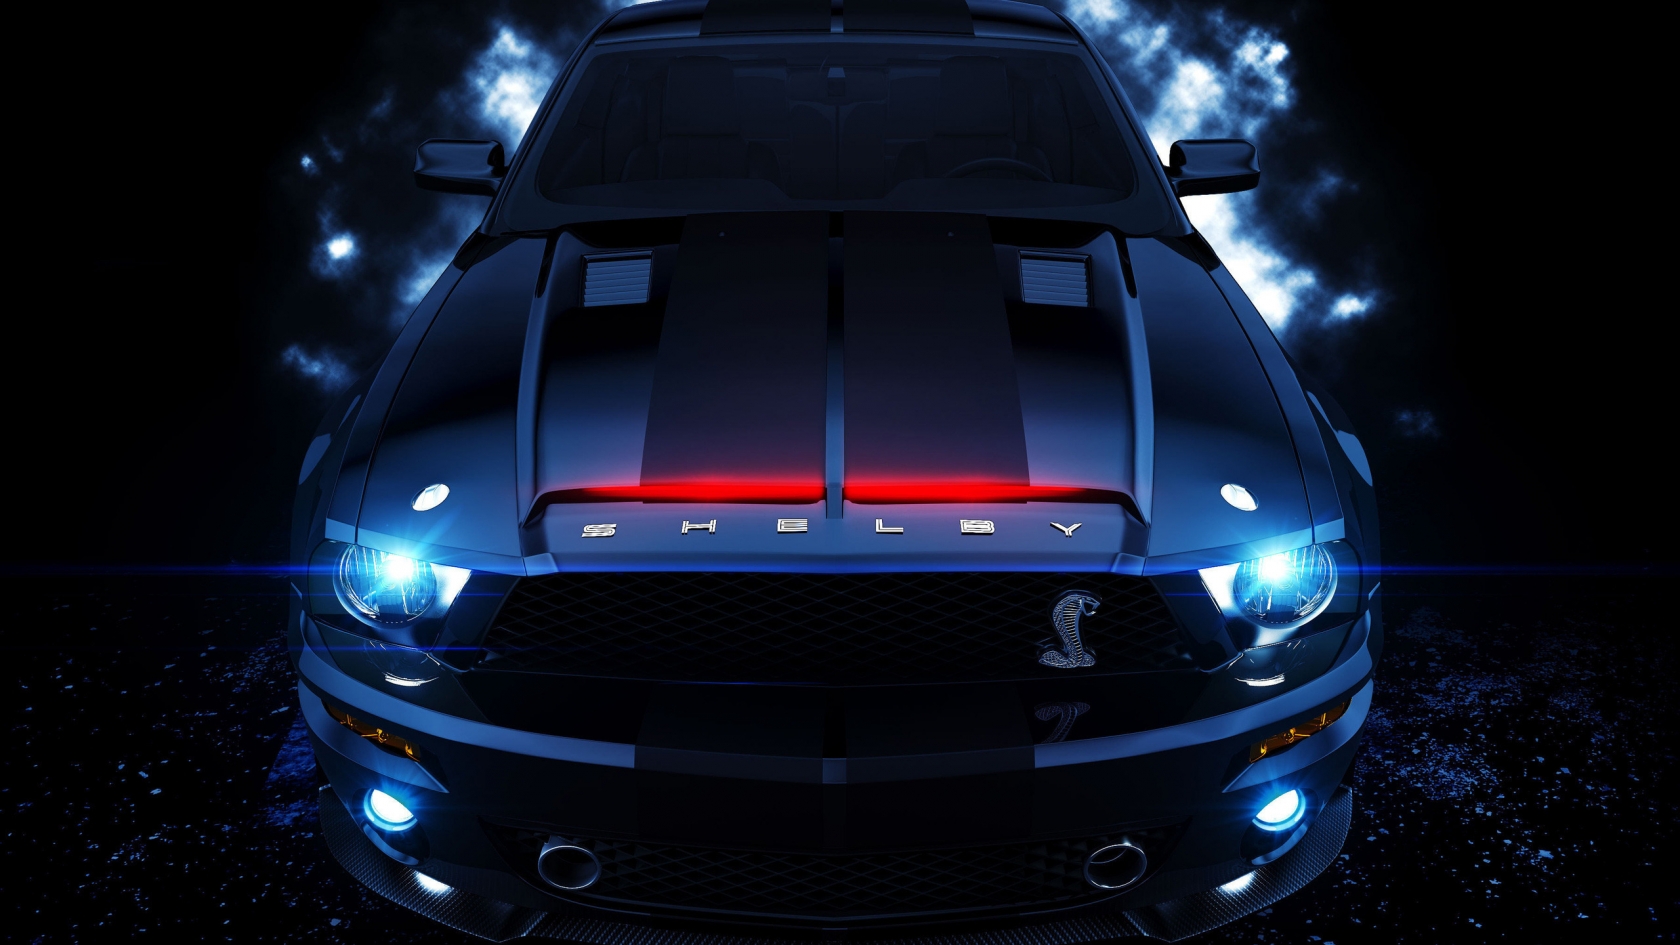 Amazing Shelby for 1680 x 945 HDTV resolution